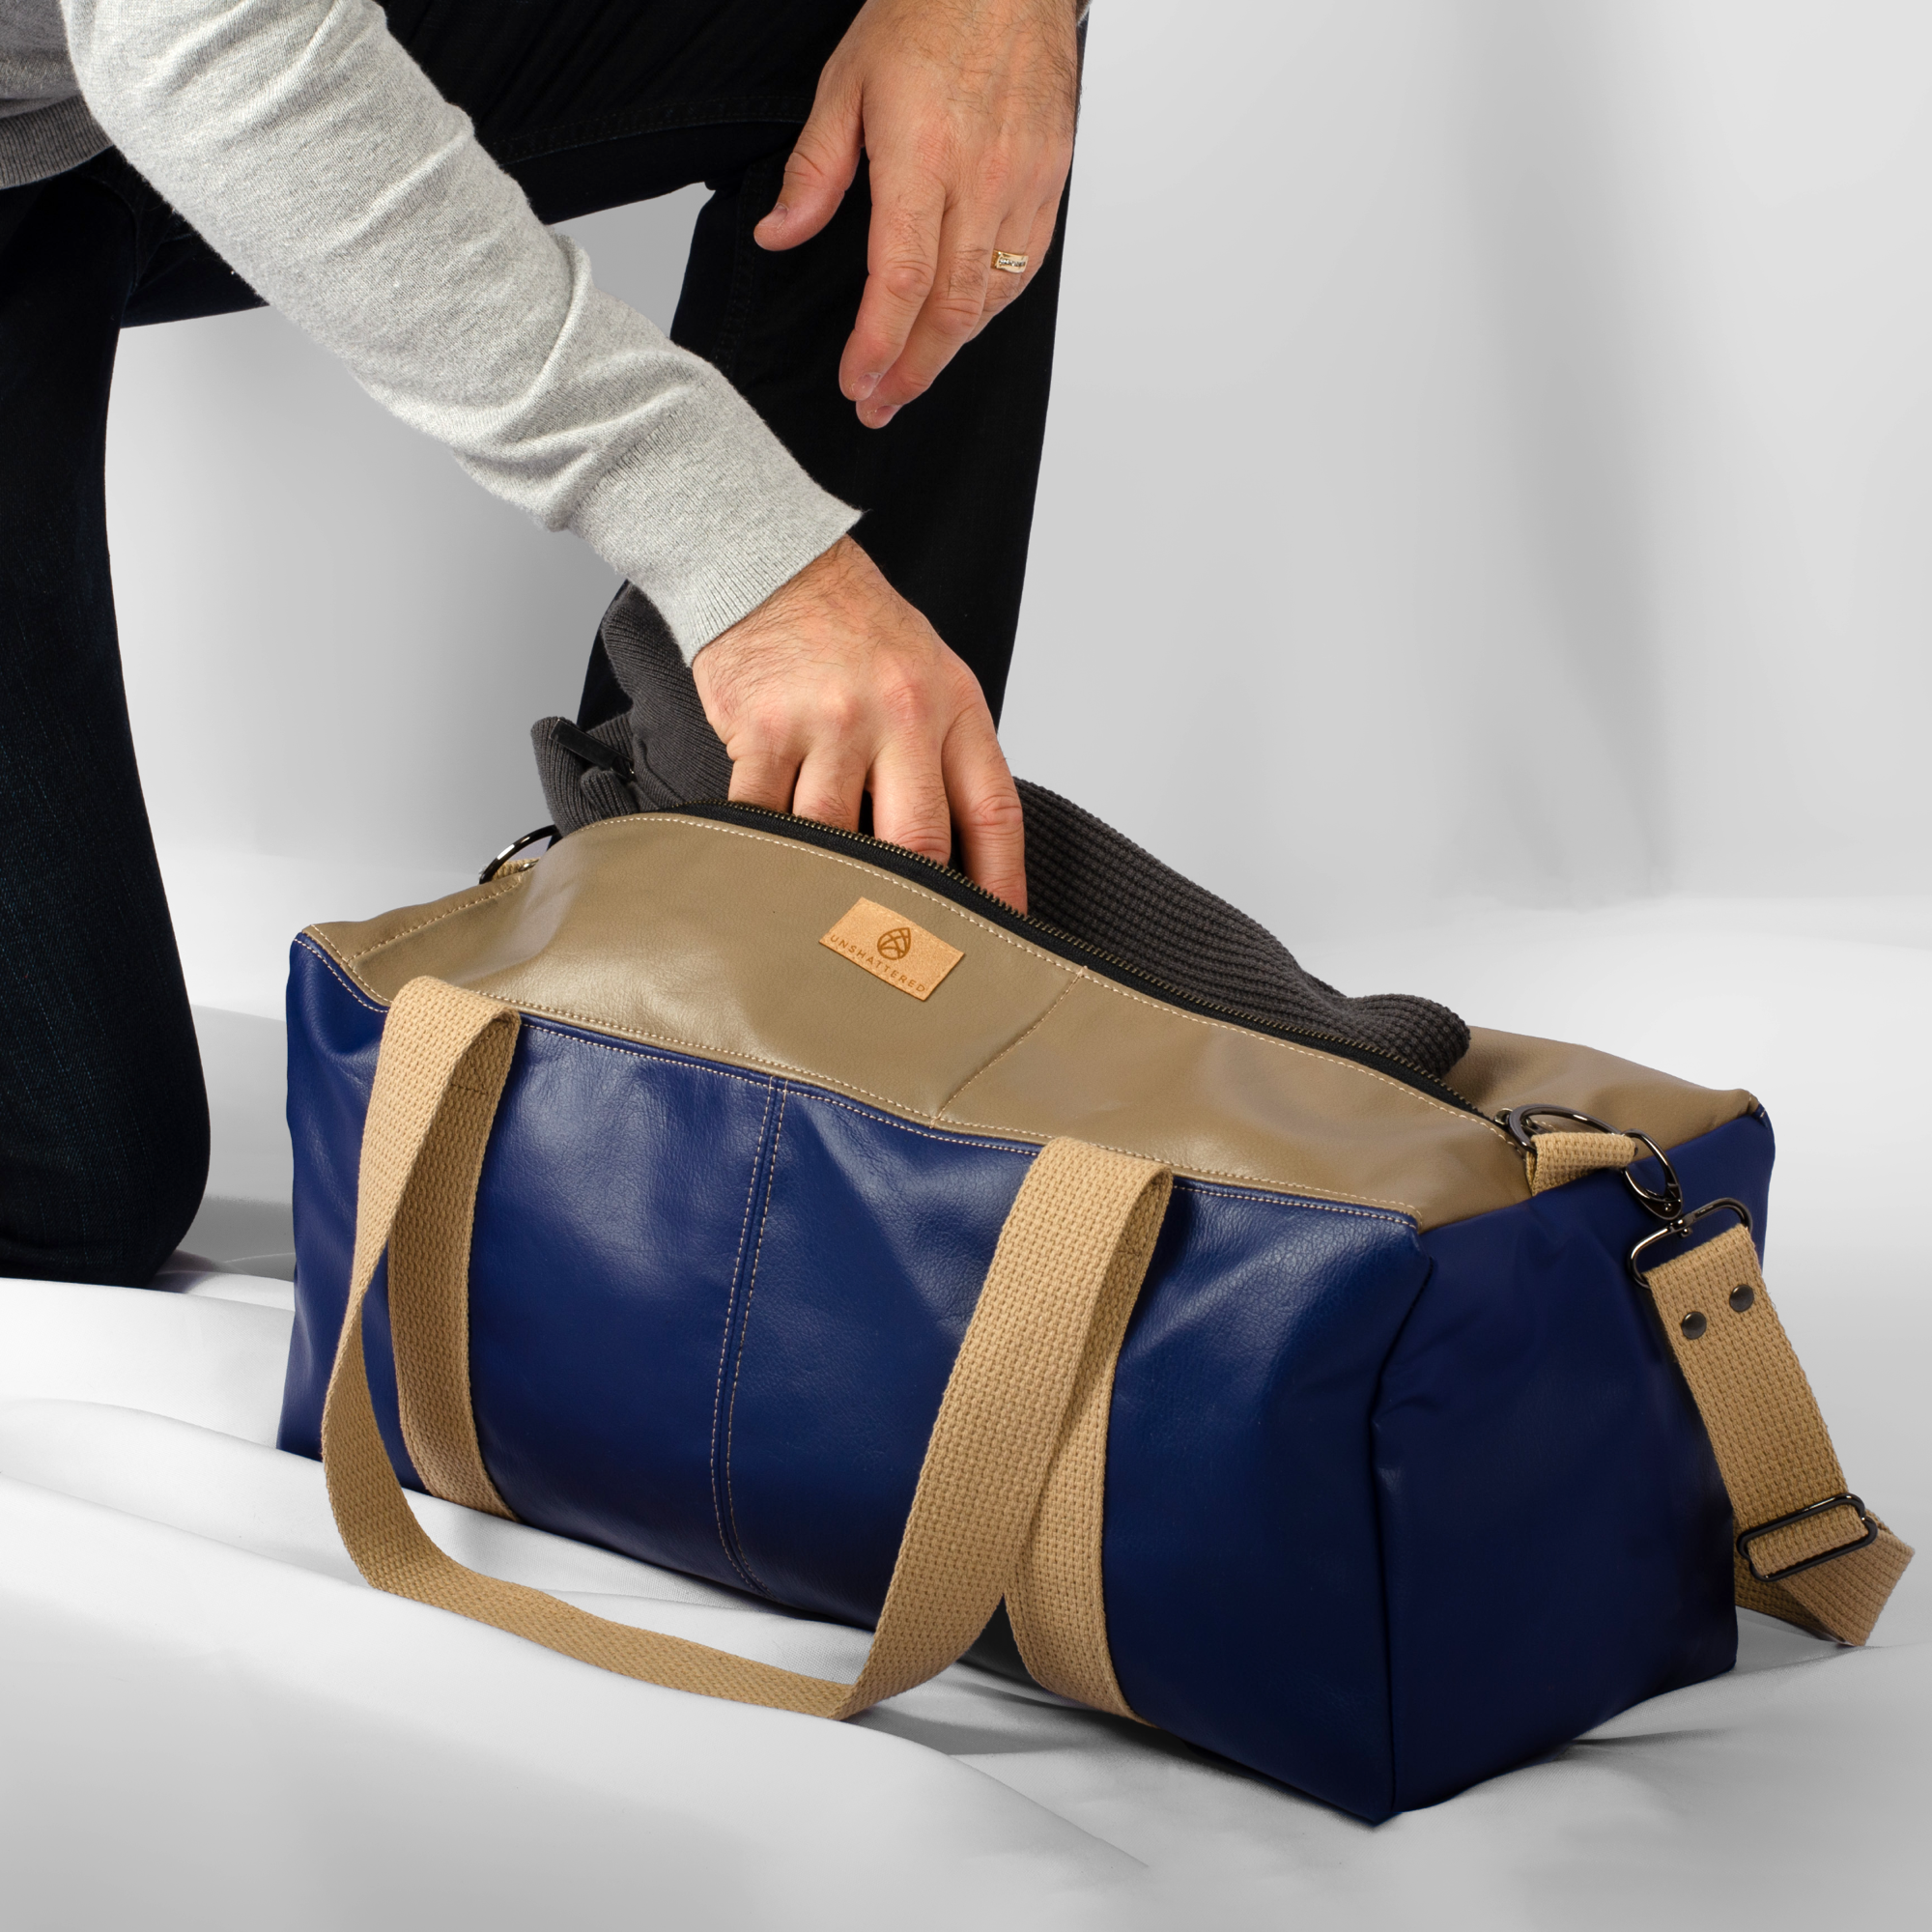 Duffle Bag from Southwest Airlines Leather